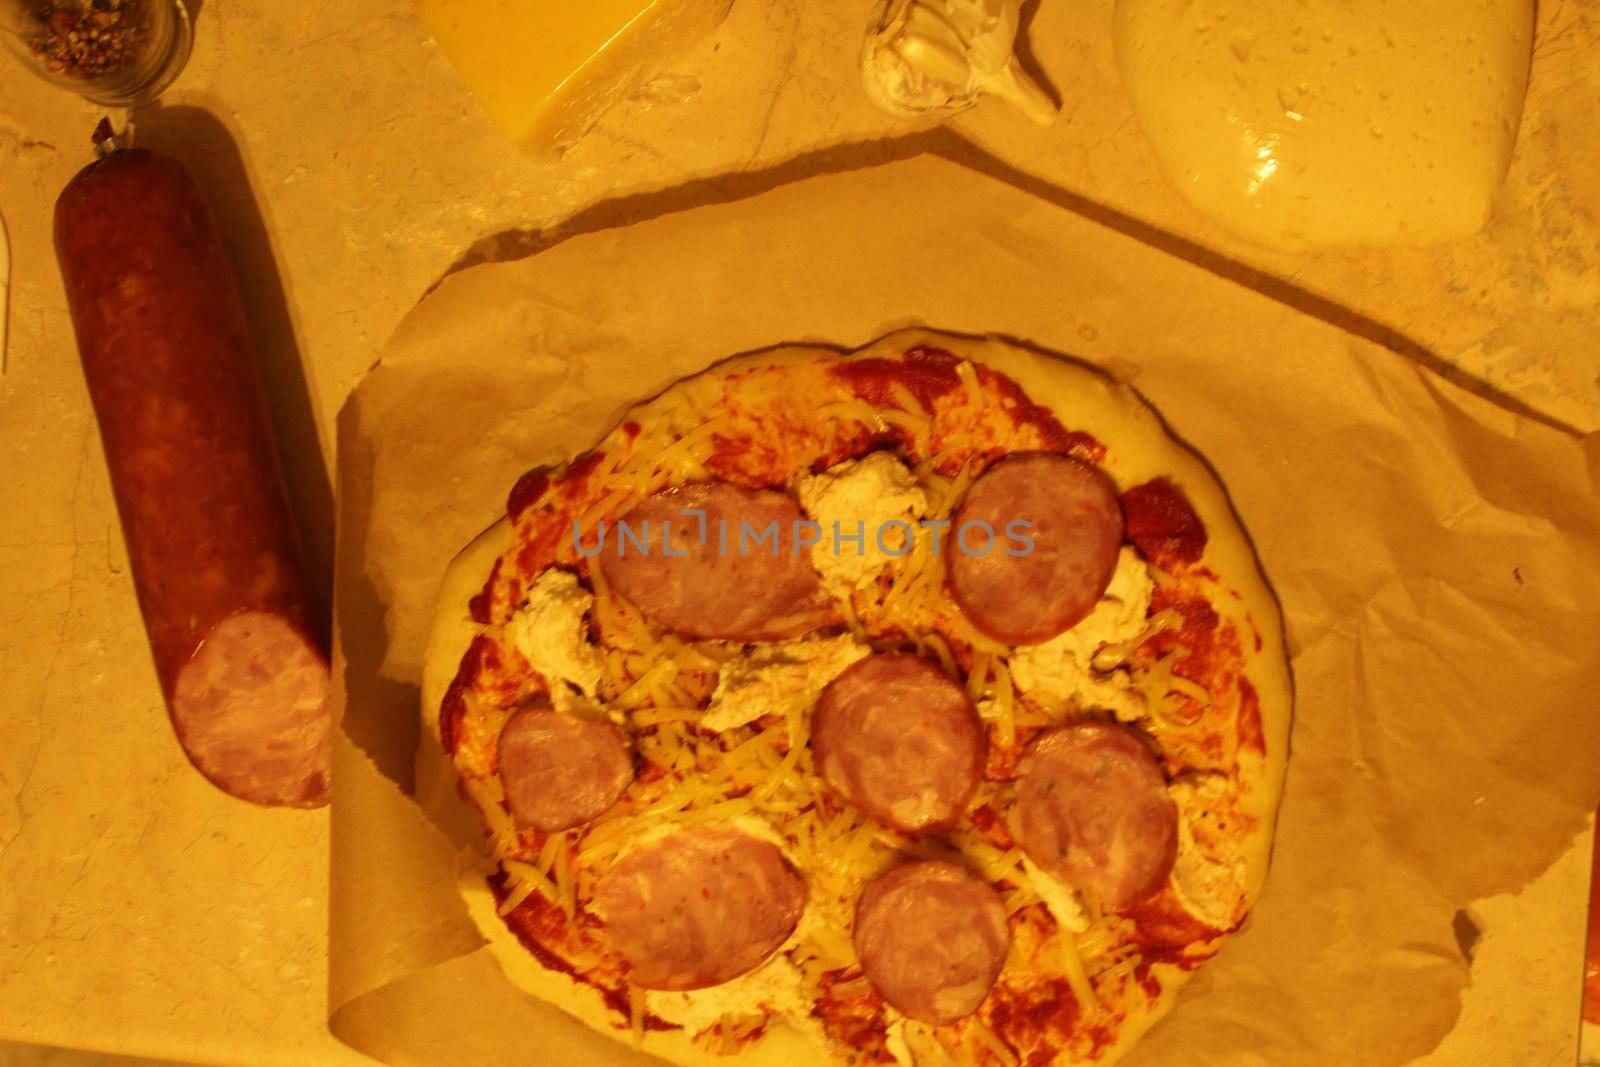 pizza with ham sausage. Homemade pizza meals lie on parchment next to the sausage. Top view.